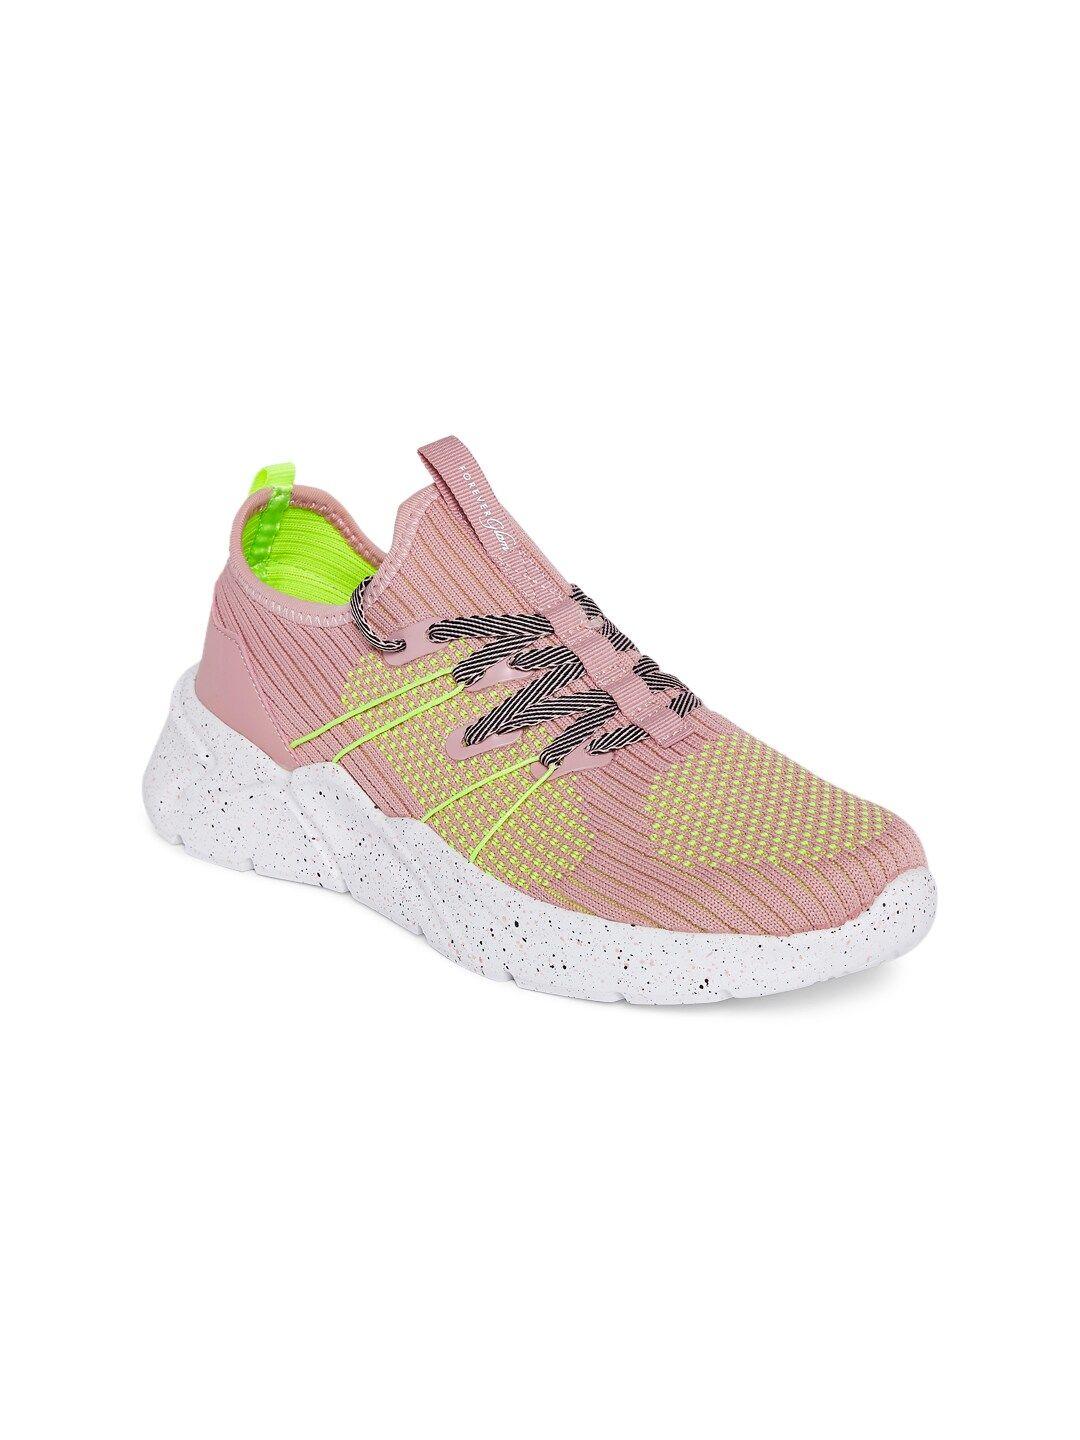 forever glam by pantaloons women pink & green flyknit walking non-marking shoes